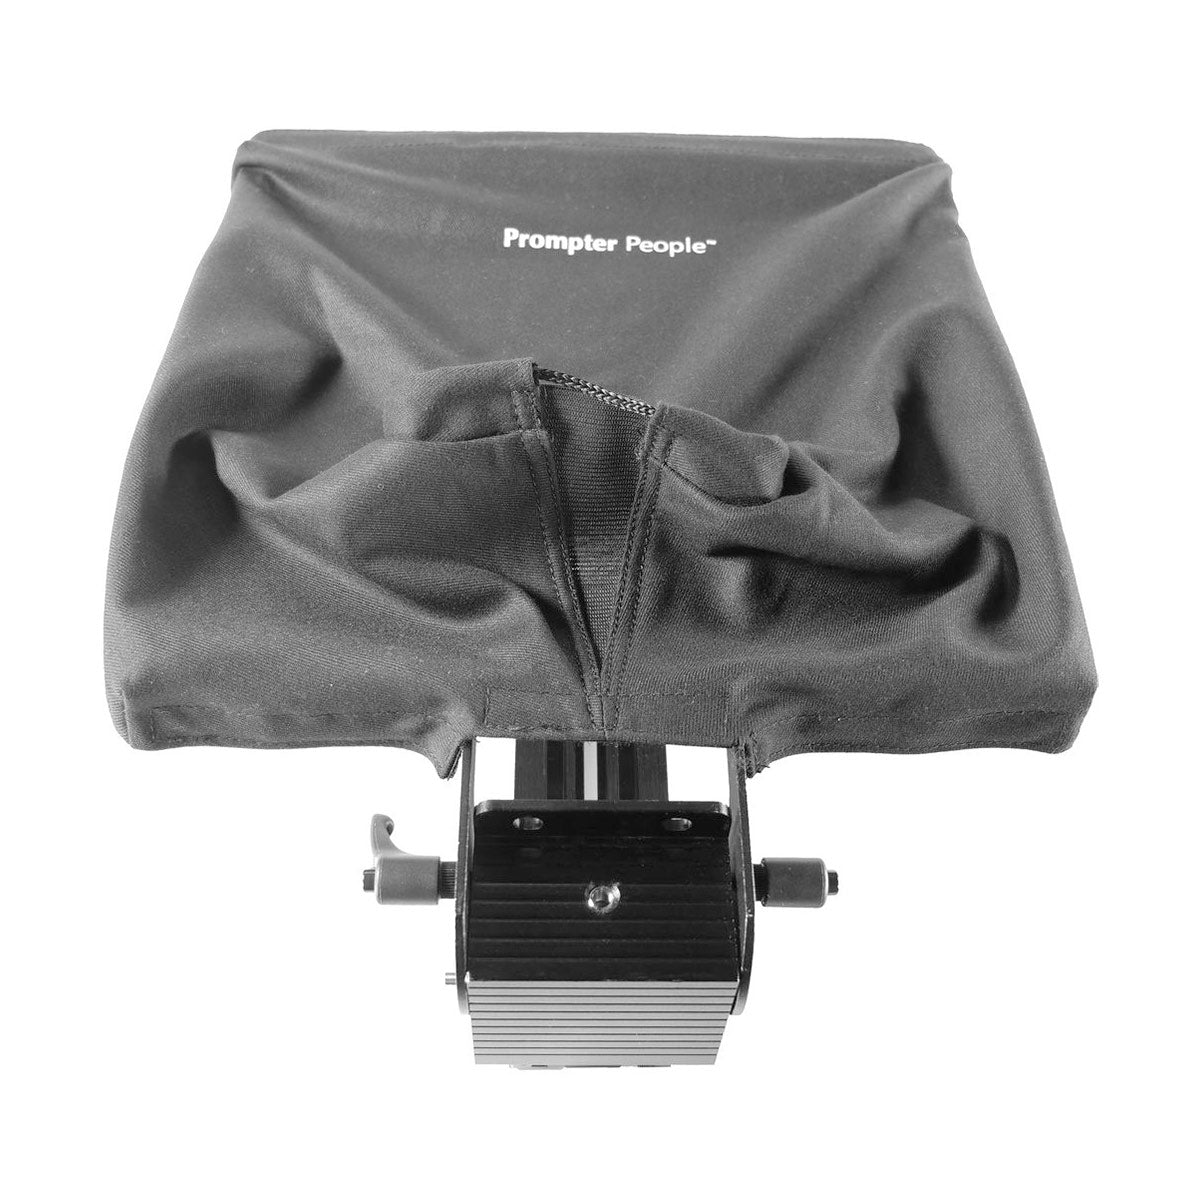 Prompter People Prompter Pal Teleprompter with Tablet Cradle (12"x12" Glass)